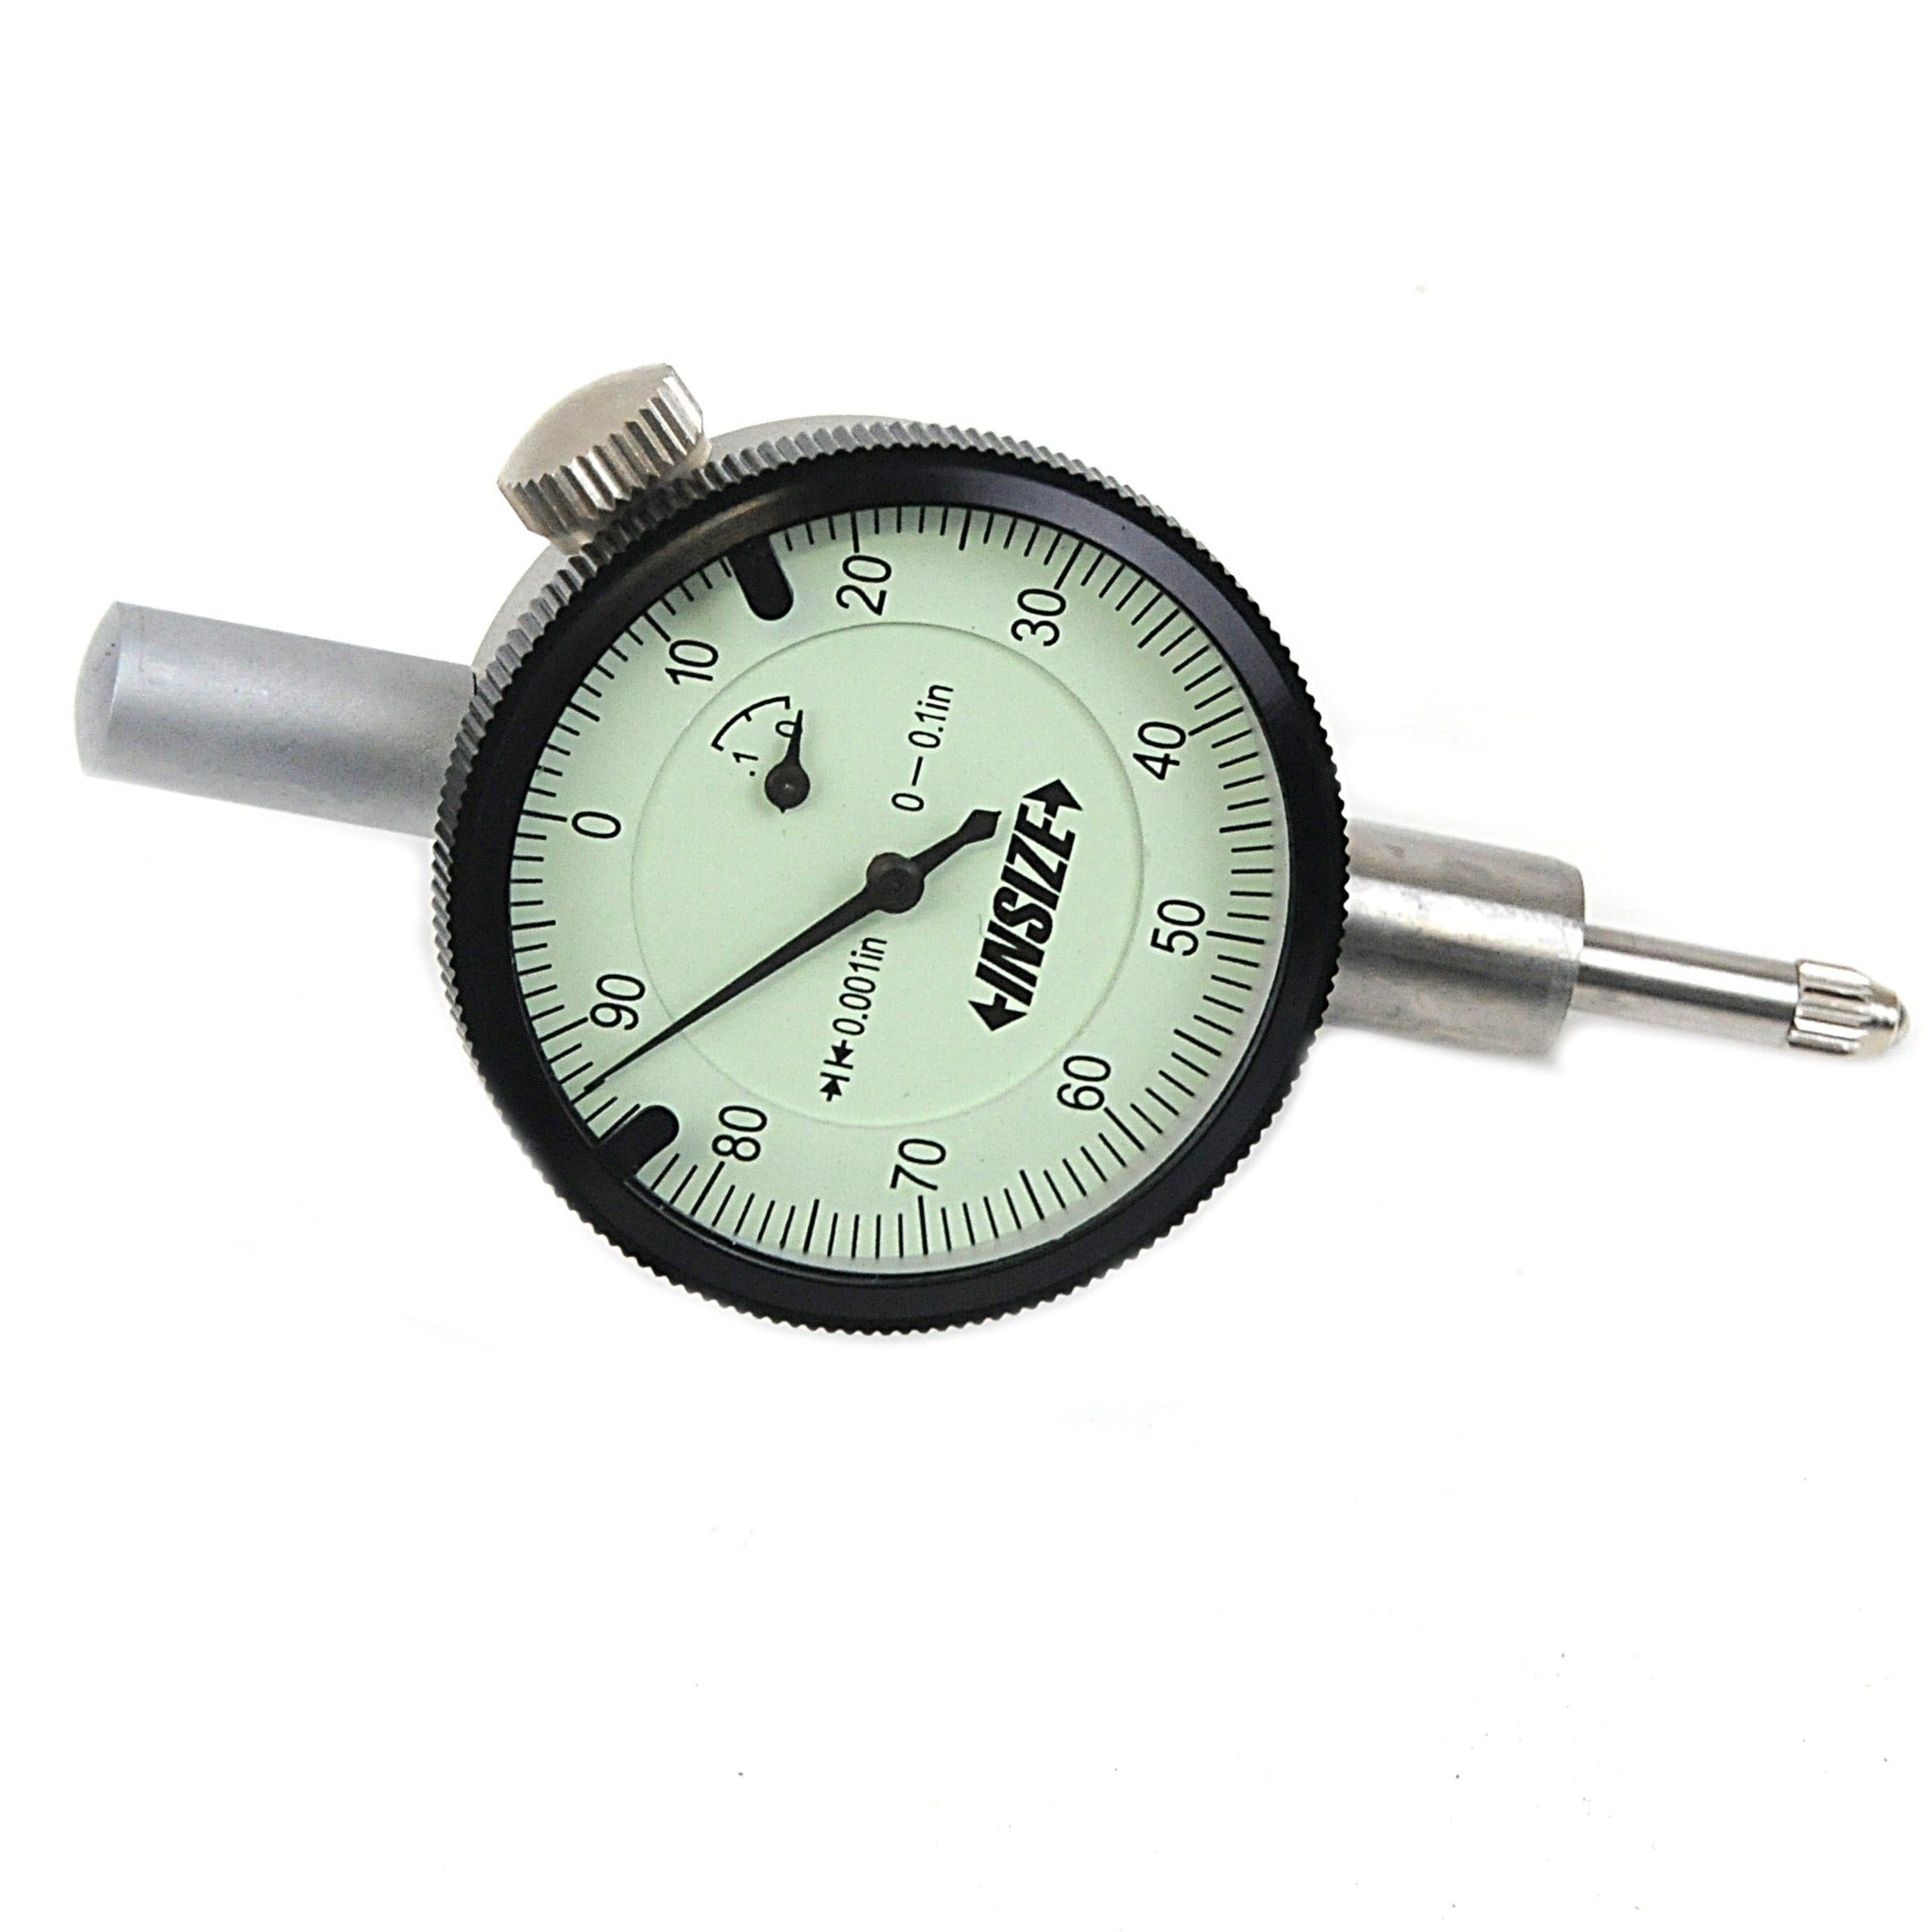 Insize Imperial Compact Dial Indicator Range 0 - 0.1" Series 2304-01